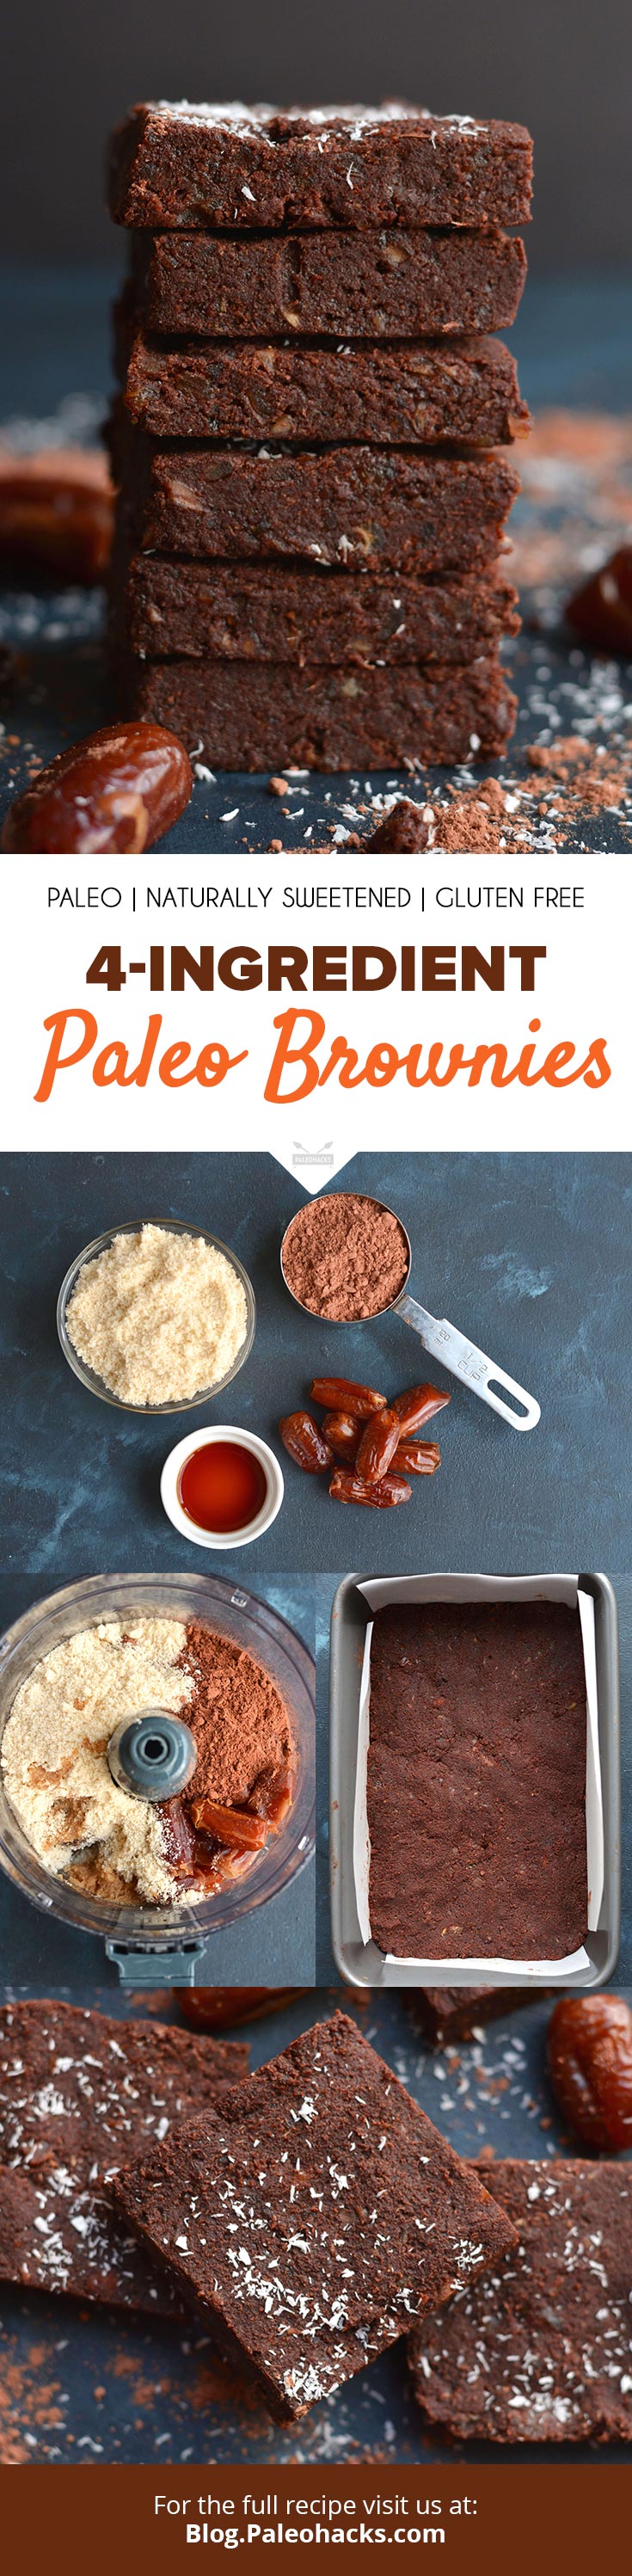 All you need is four ingredients to whip up these yummy, no-bake chocolate brownies! The secret to this easy brownie recipe? Pitted dates.